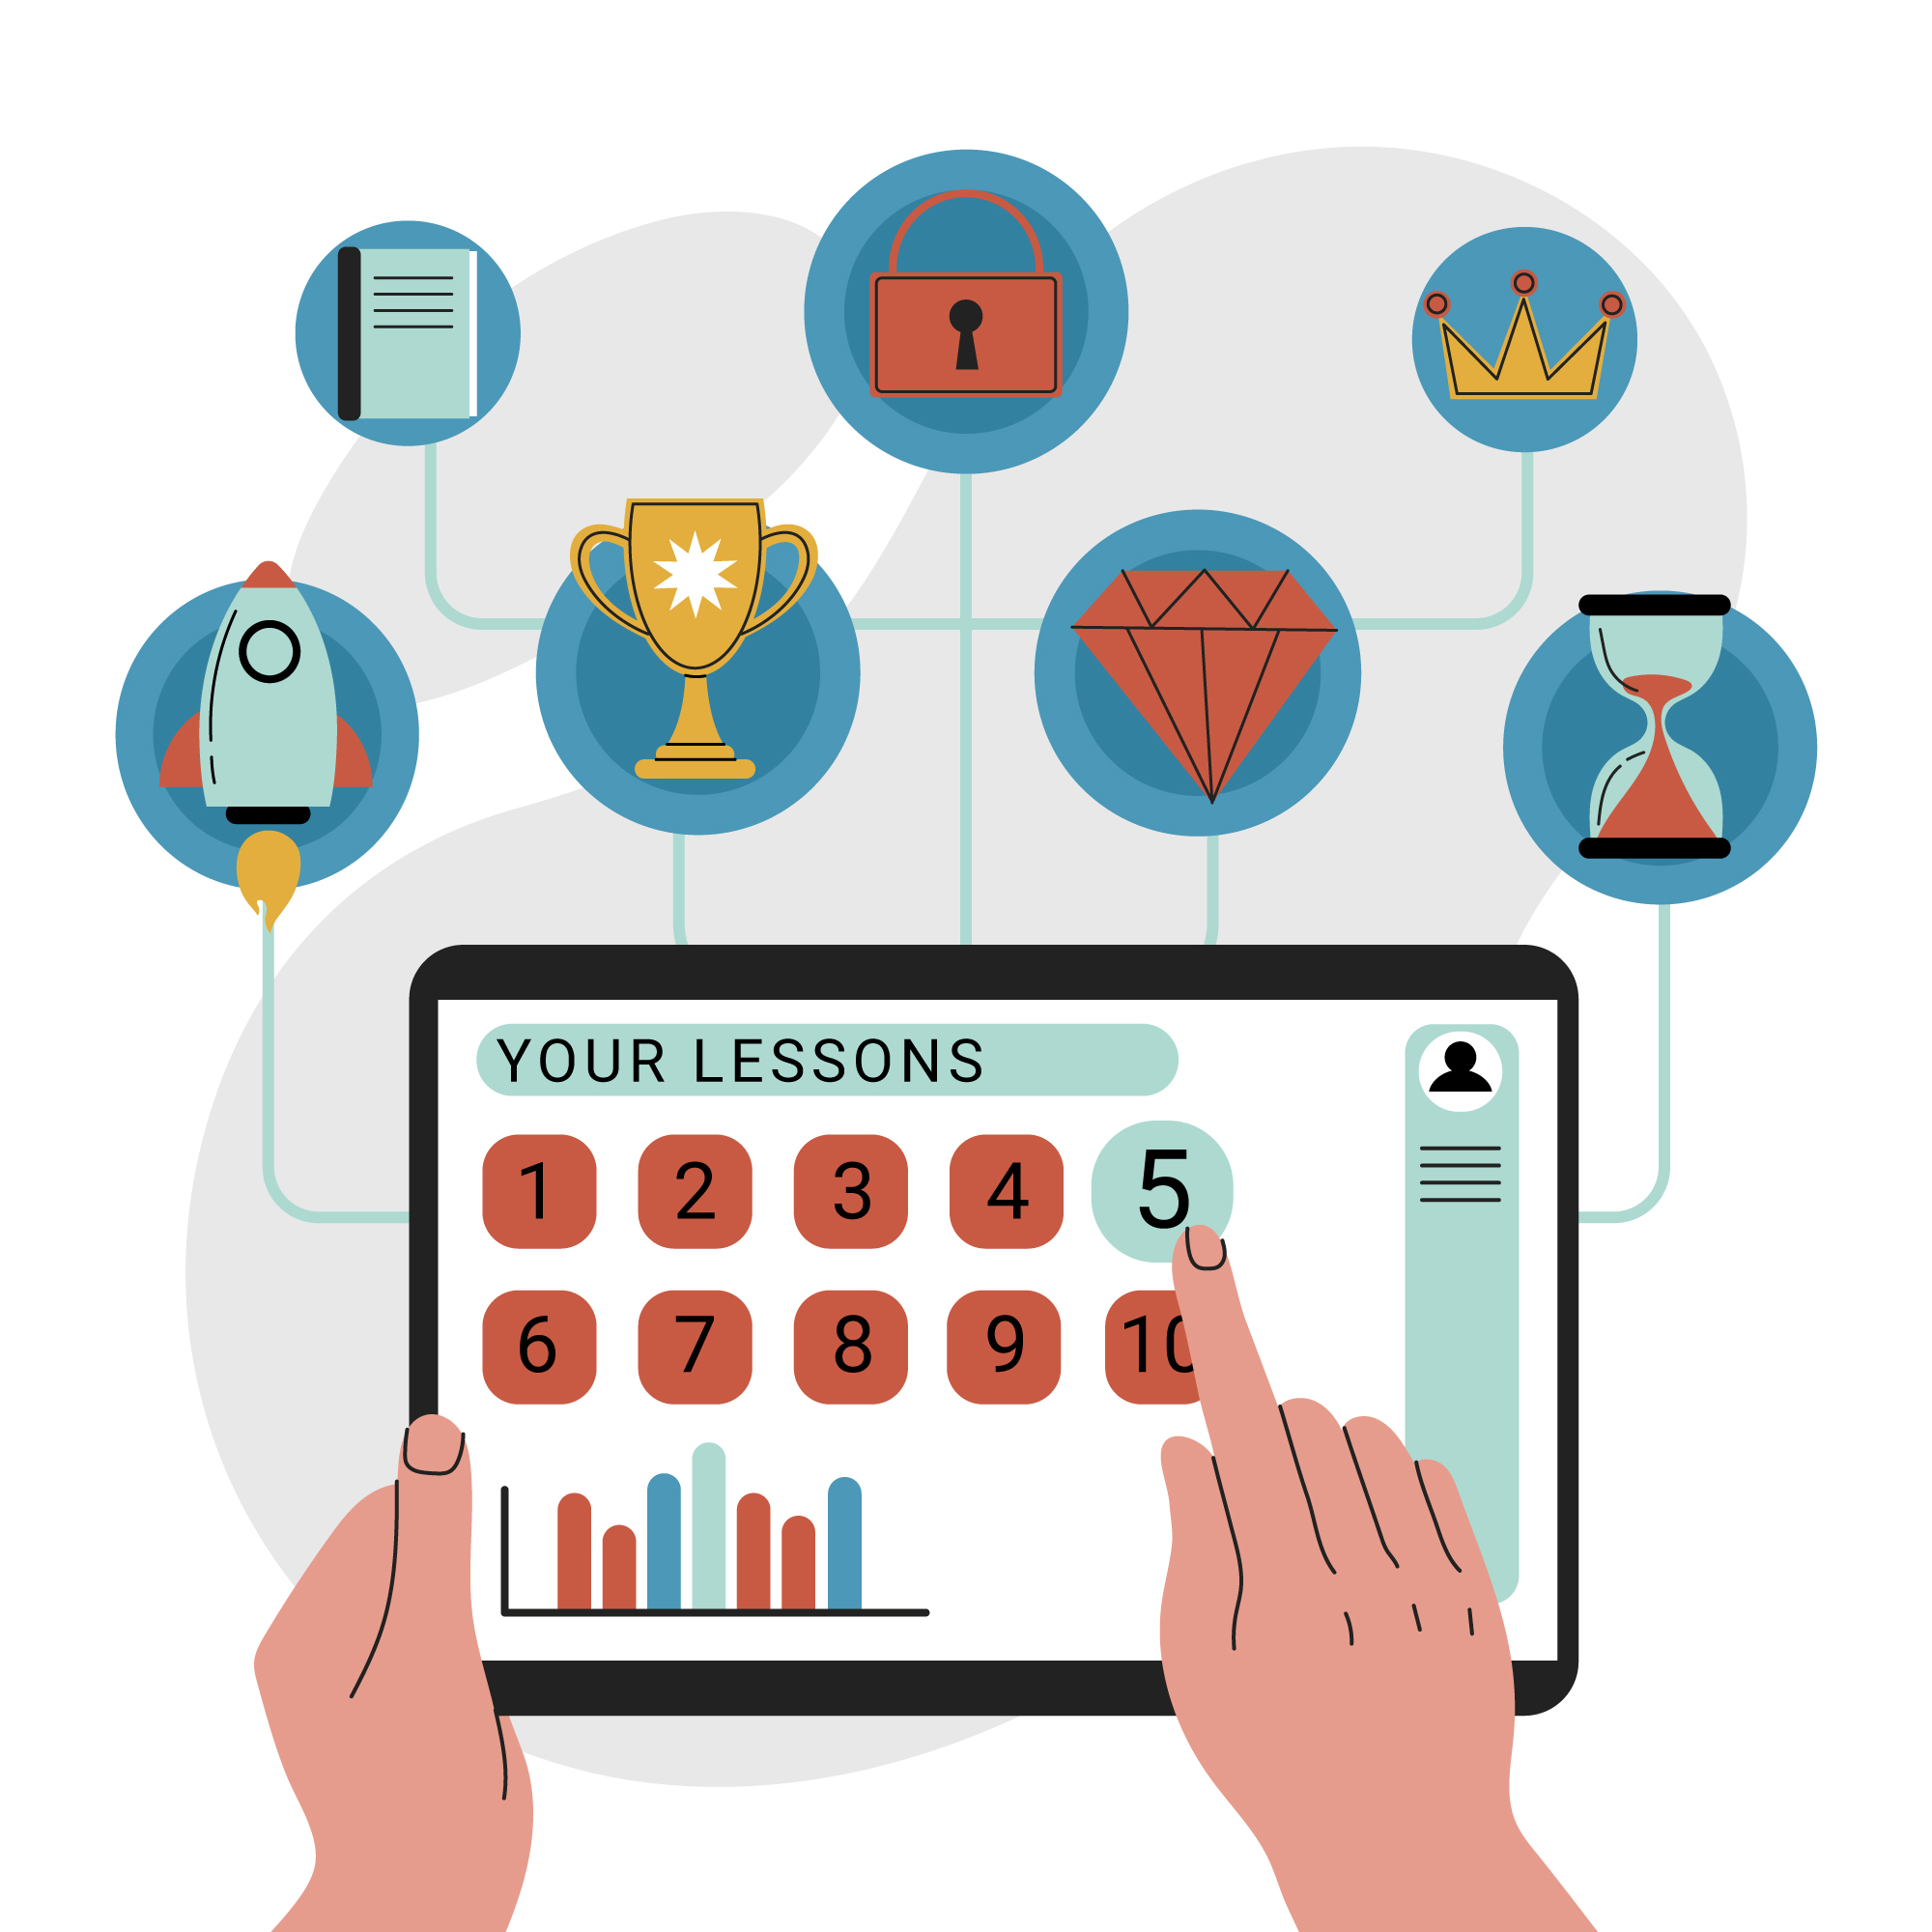 LMS Gamification